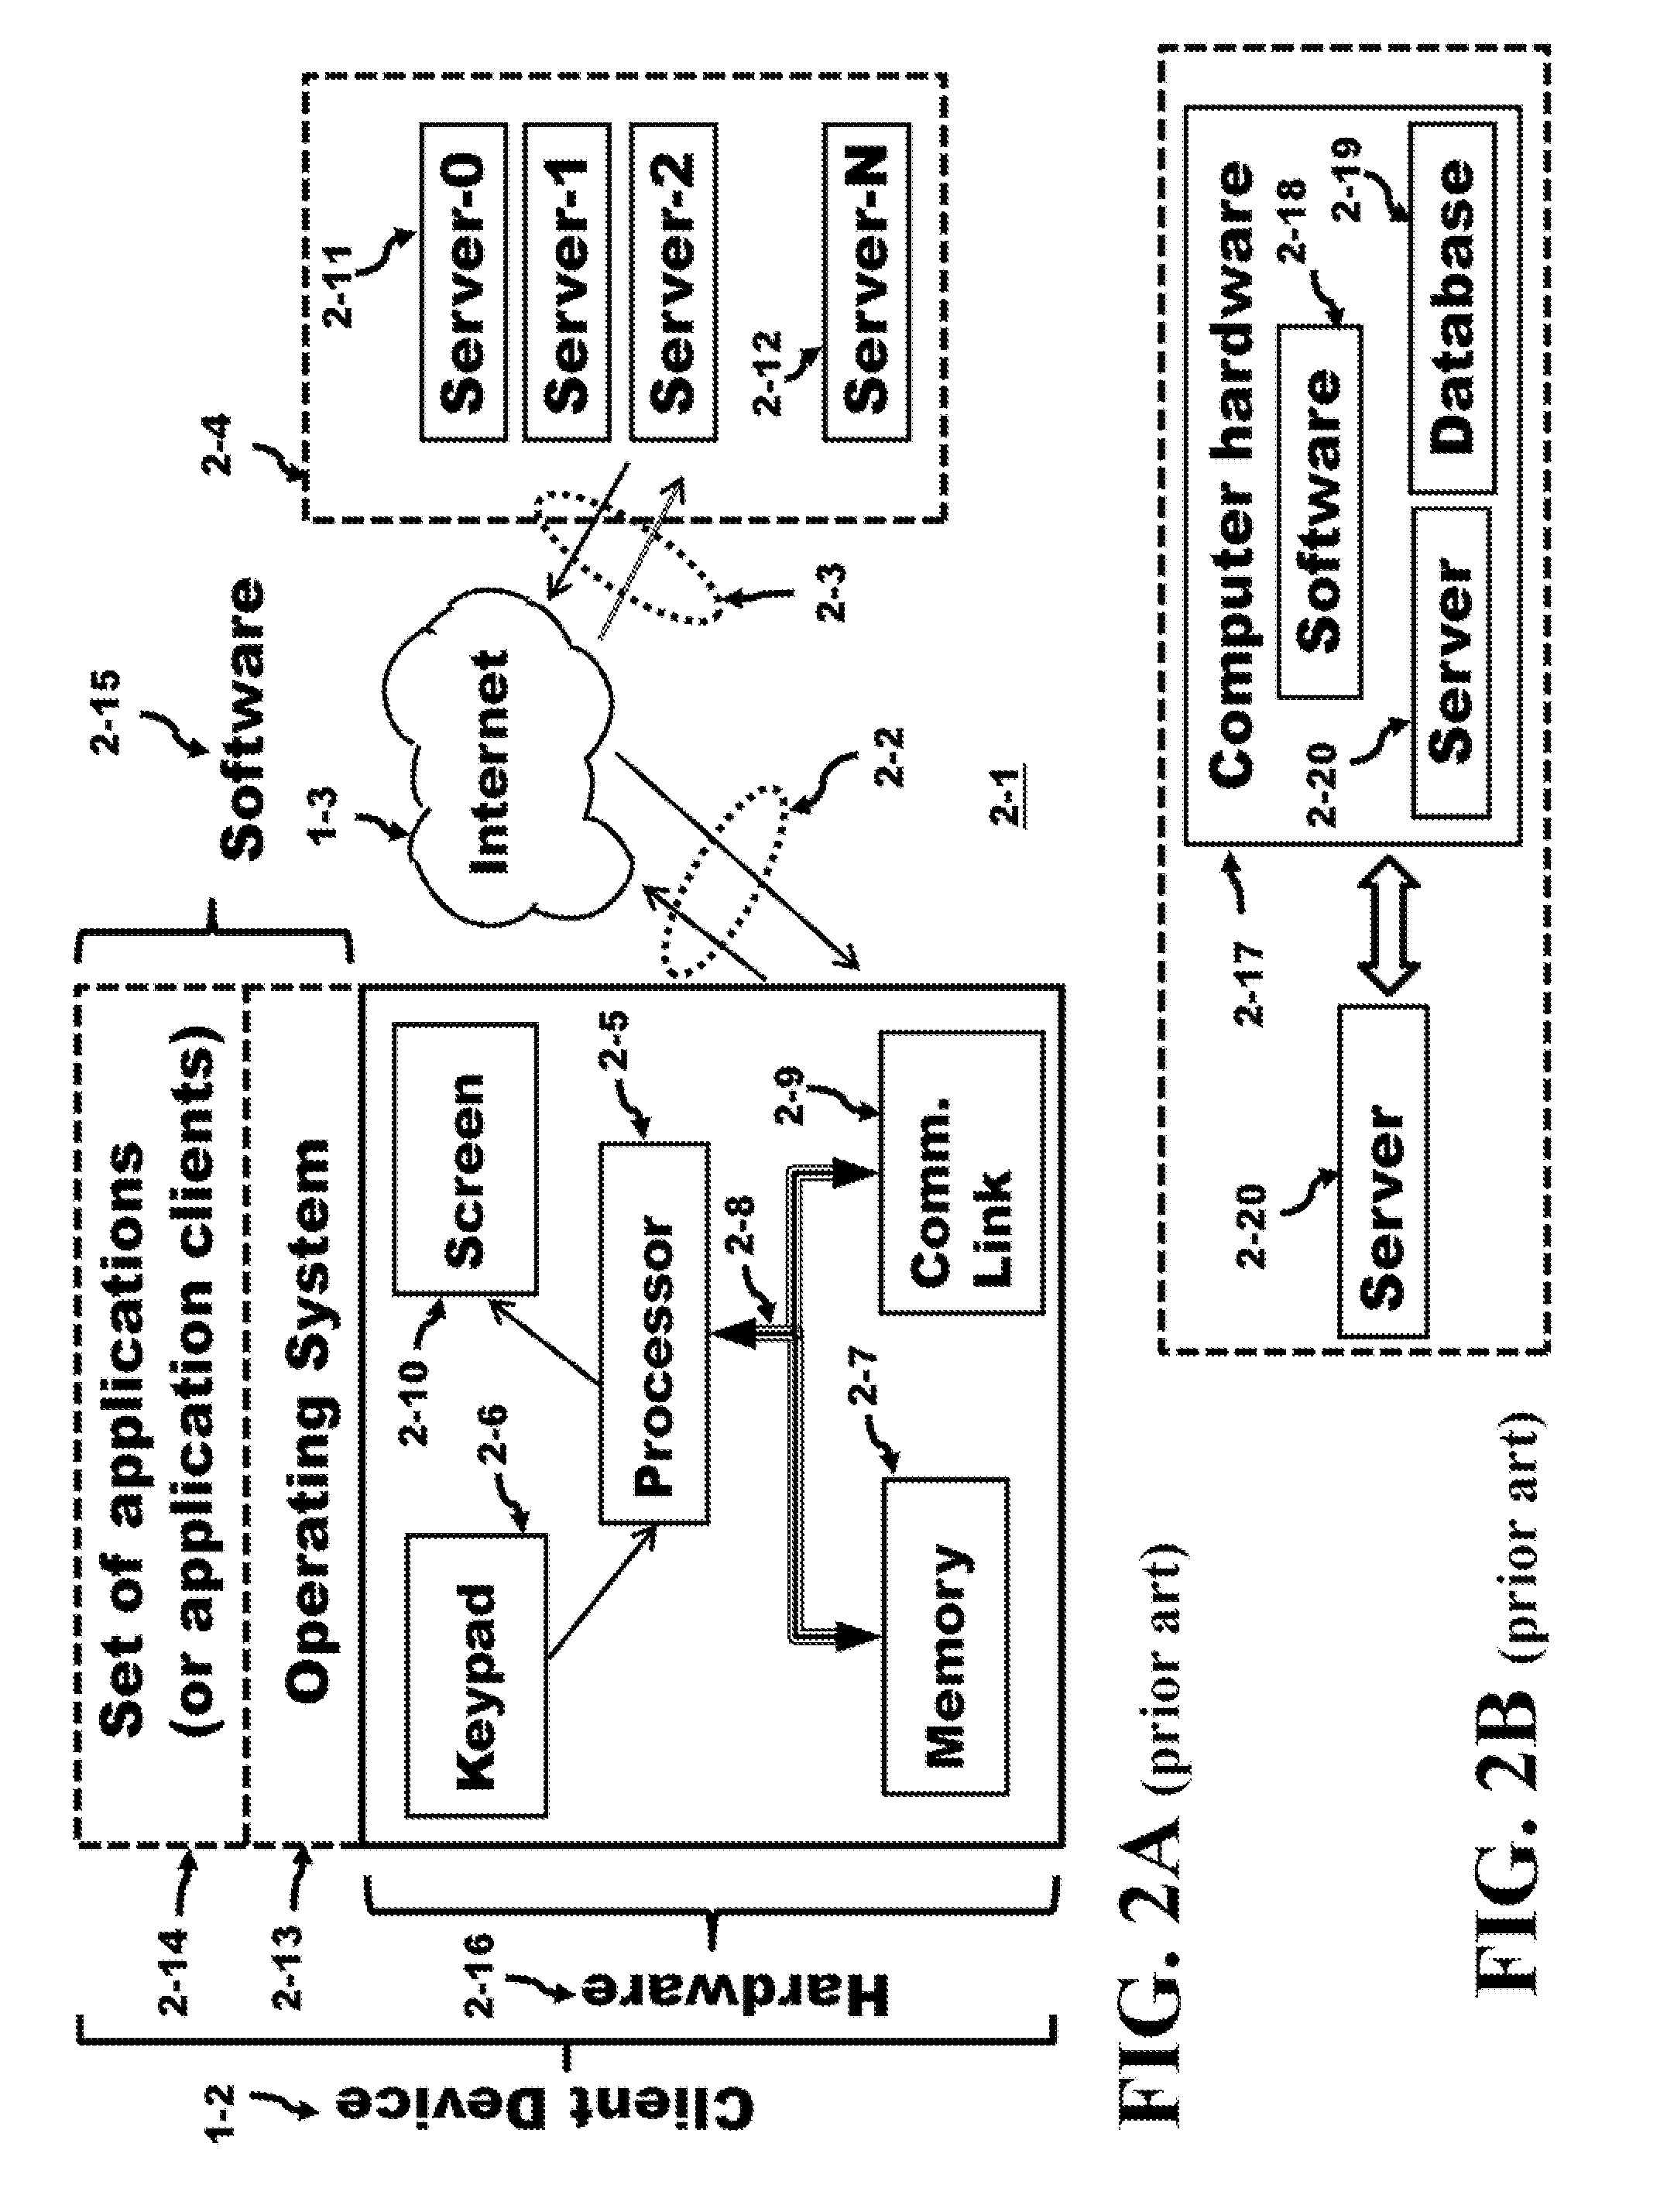 Apparatus for Single Workflow for Multi-Platform Mobile Application Creation and Delivery